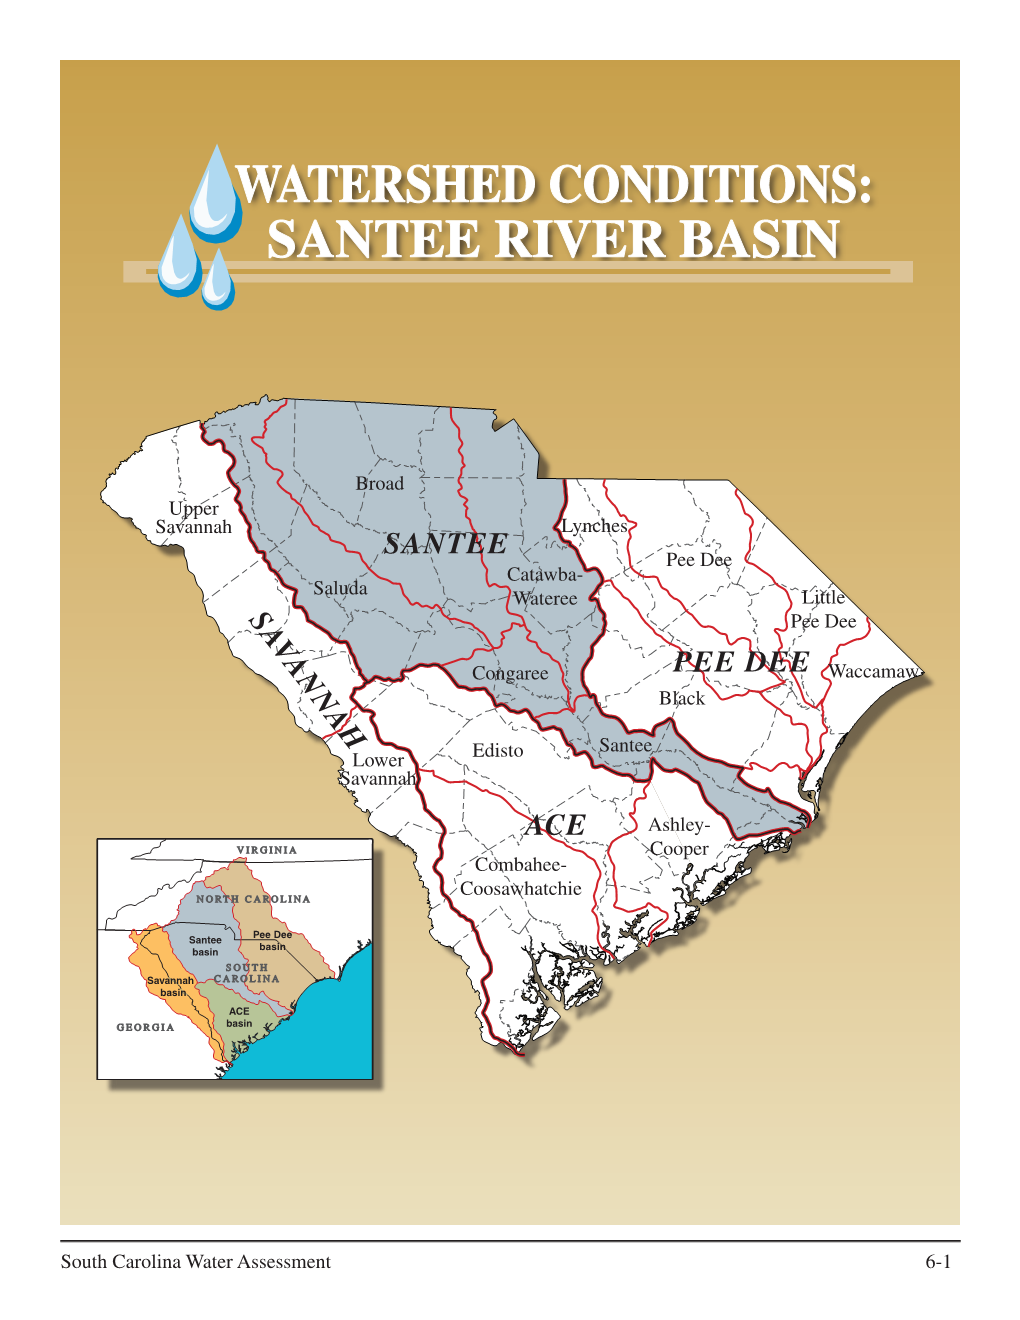 Watershed Conditions: Santee River Basin